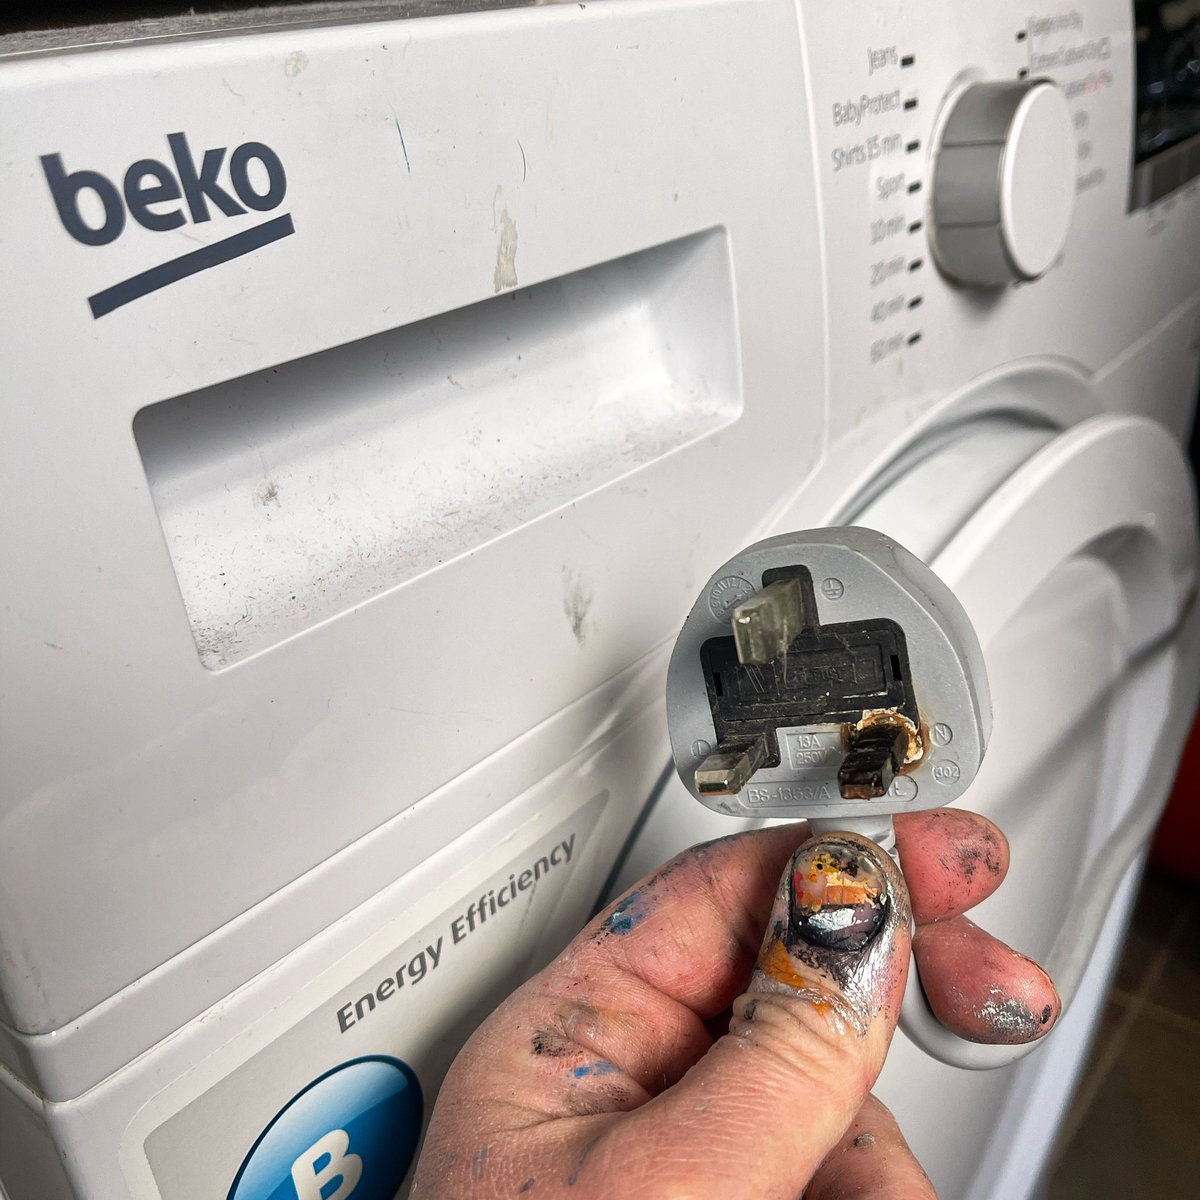 That’ll be the culprit. The Tumble dryer got hot, now bought a surge protector lead plug for other appliances.

Could of been nasty! 

Won’t be using it until I know what’s caused this @Beko appliance to want to start it’s own indoor fire. 👀😬🔥

#Tumbledryer